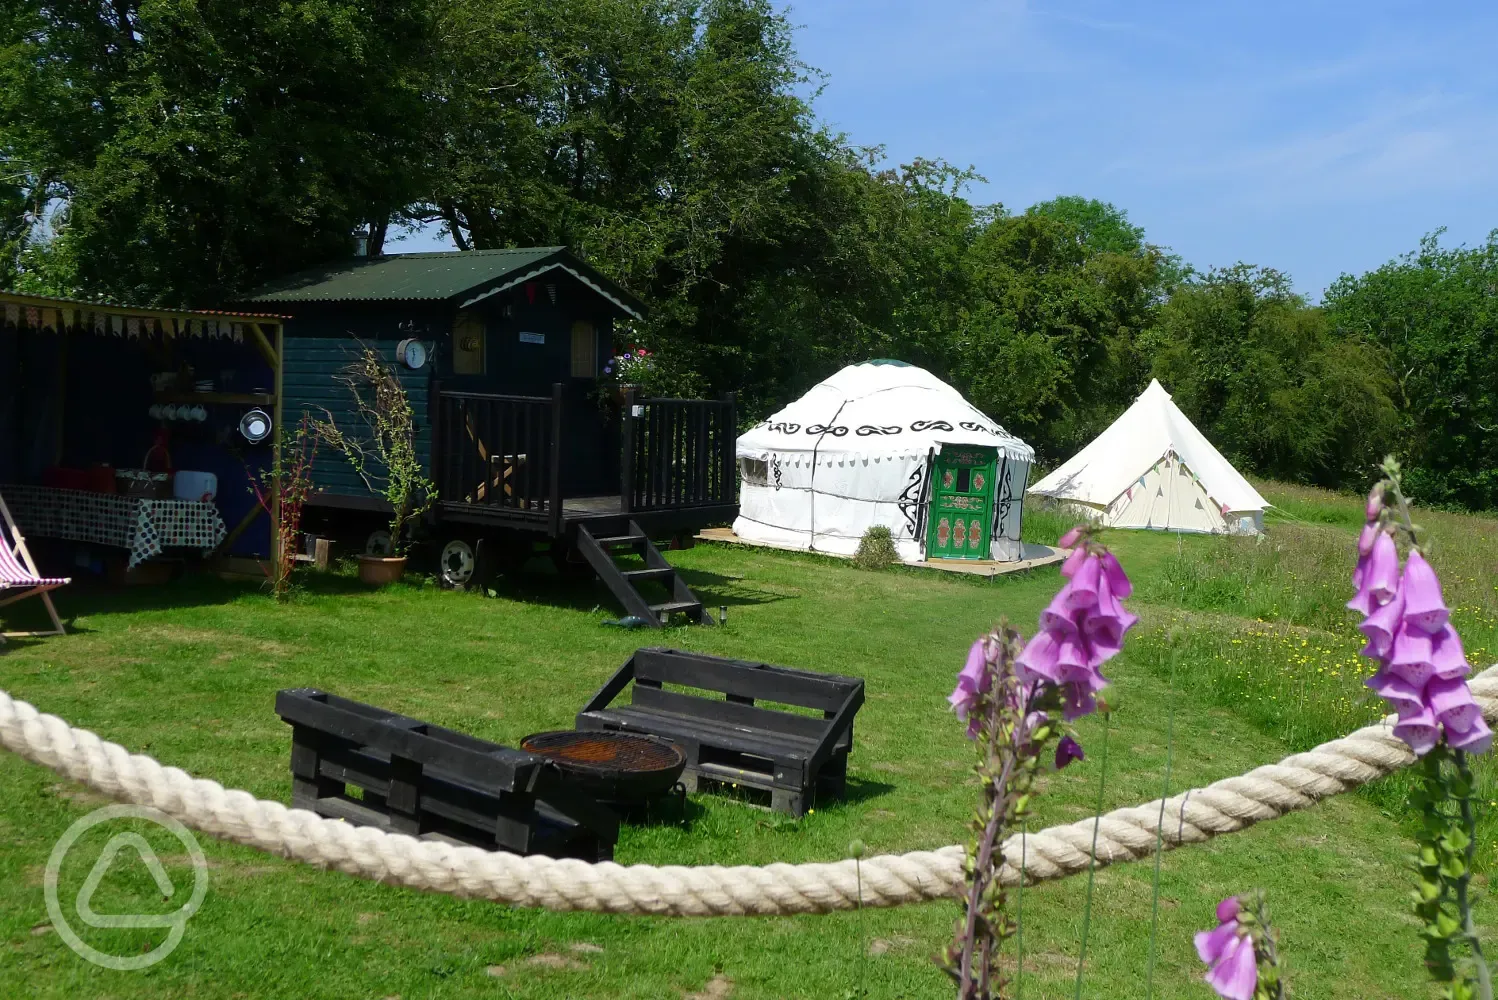 The Bathroom Hut, Yurt and Bell Tent from the Shepherd's Hut